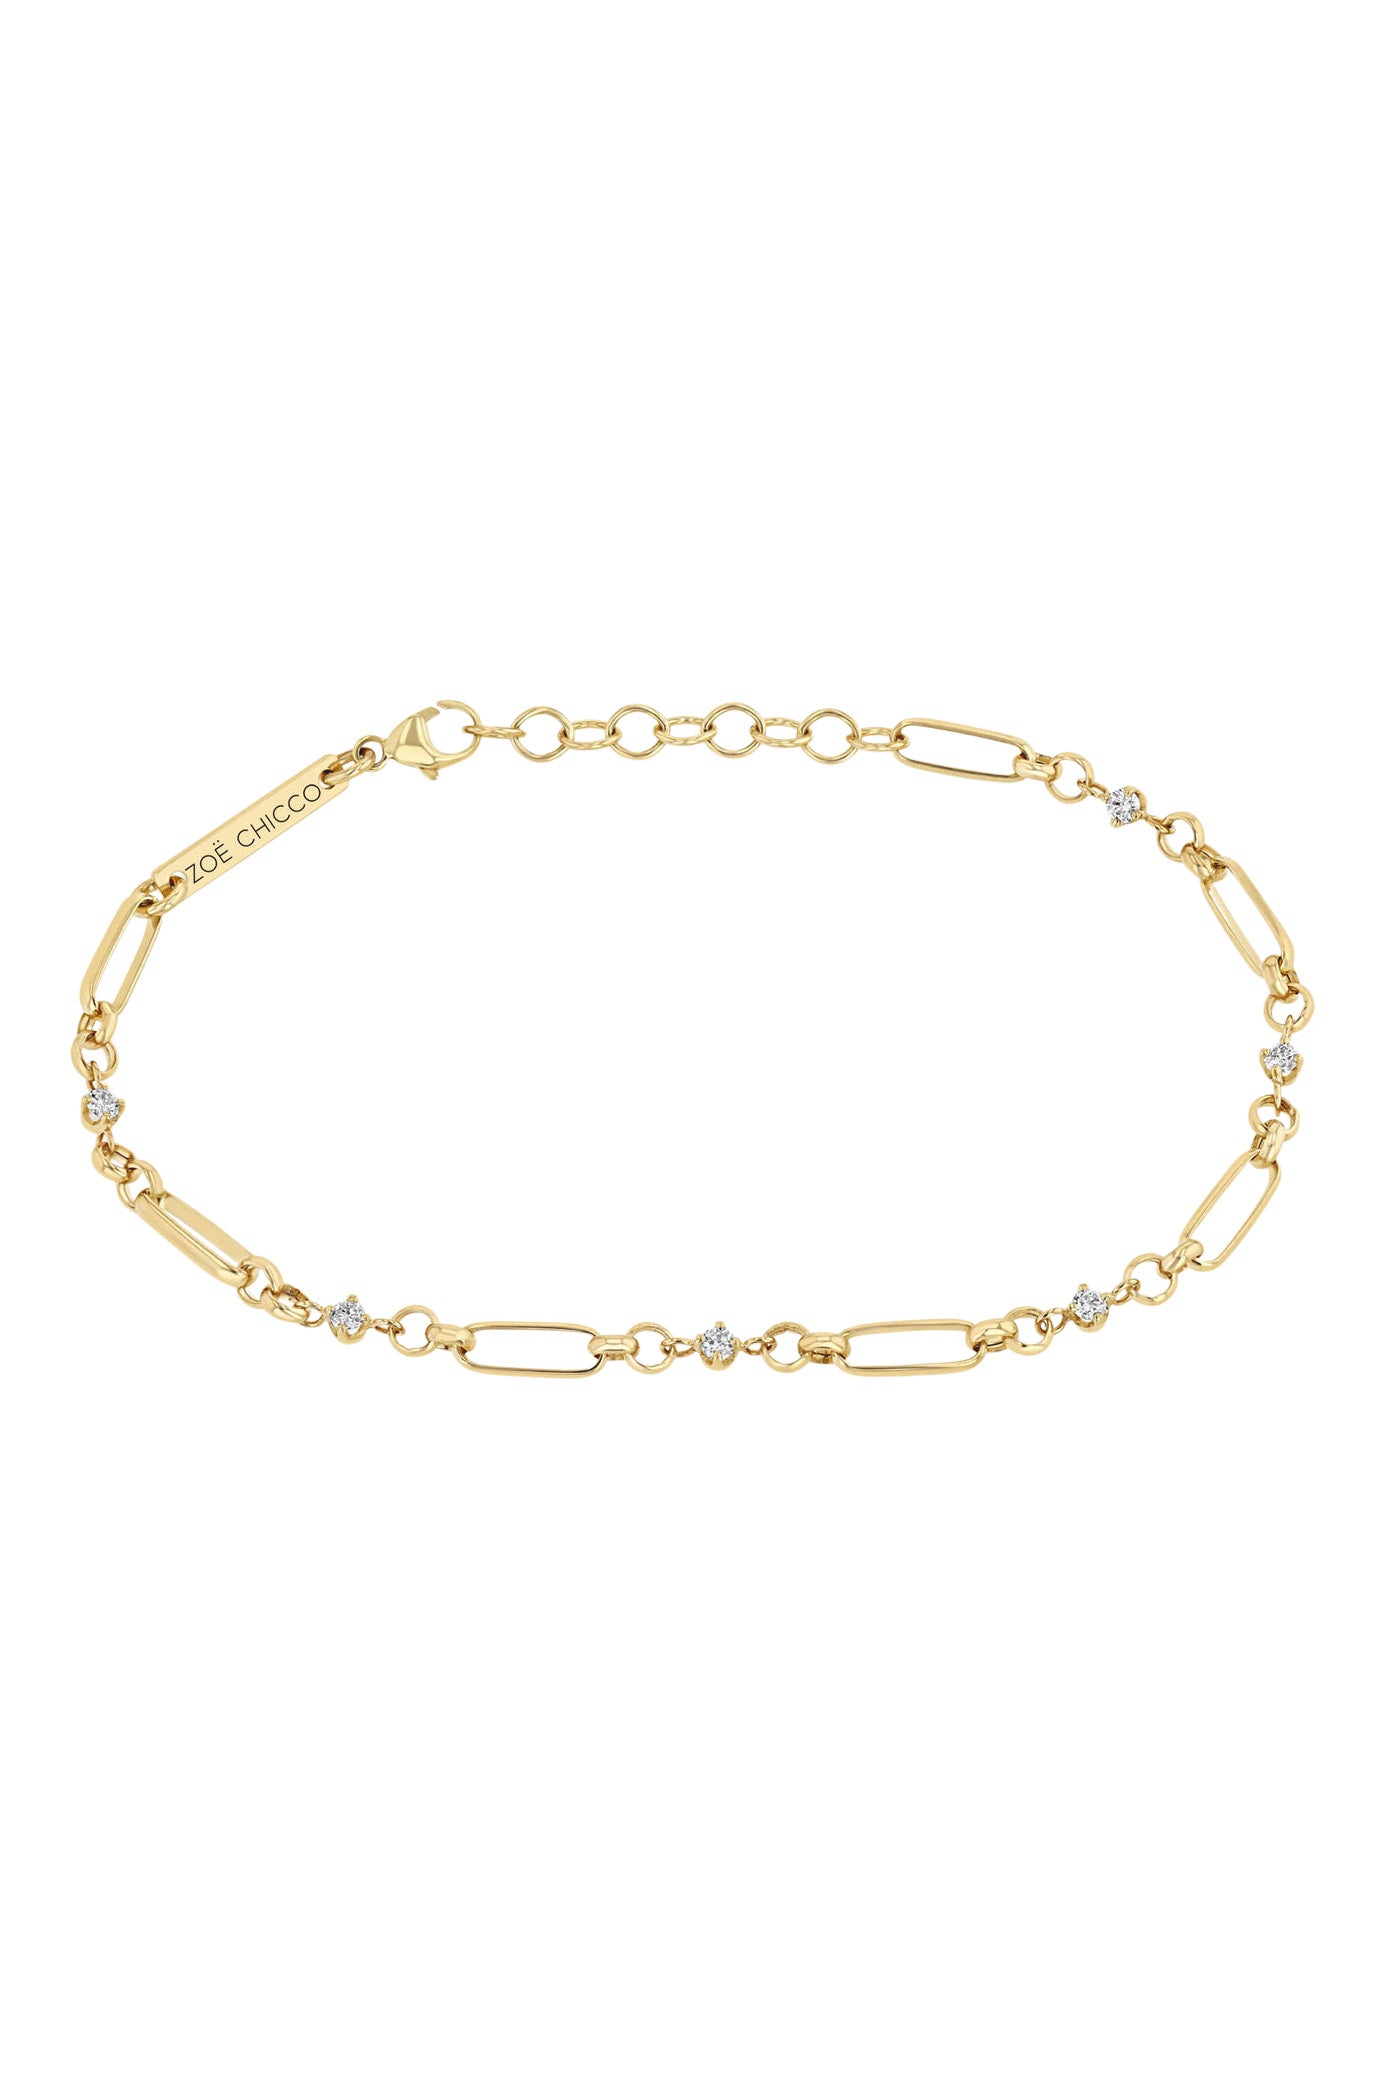 Zoe Chicco Linked Prong Diamond & Medium Paperclip Rolo Chain Bracelet in 14k Yellow Gold